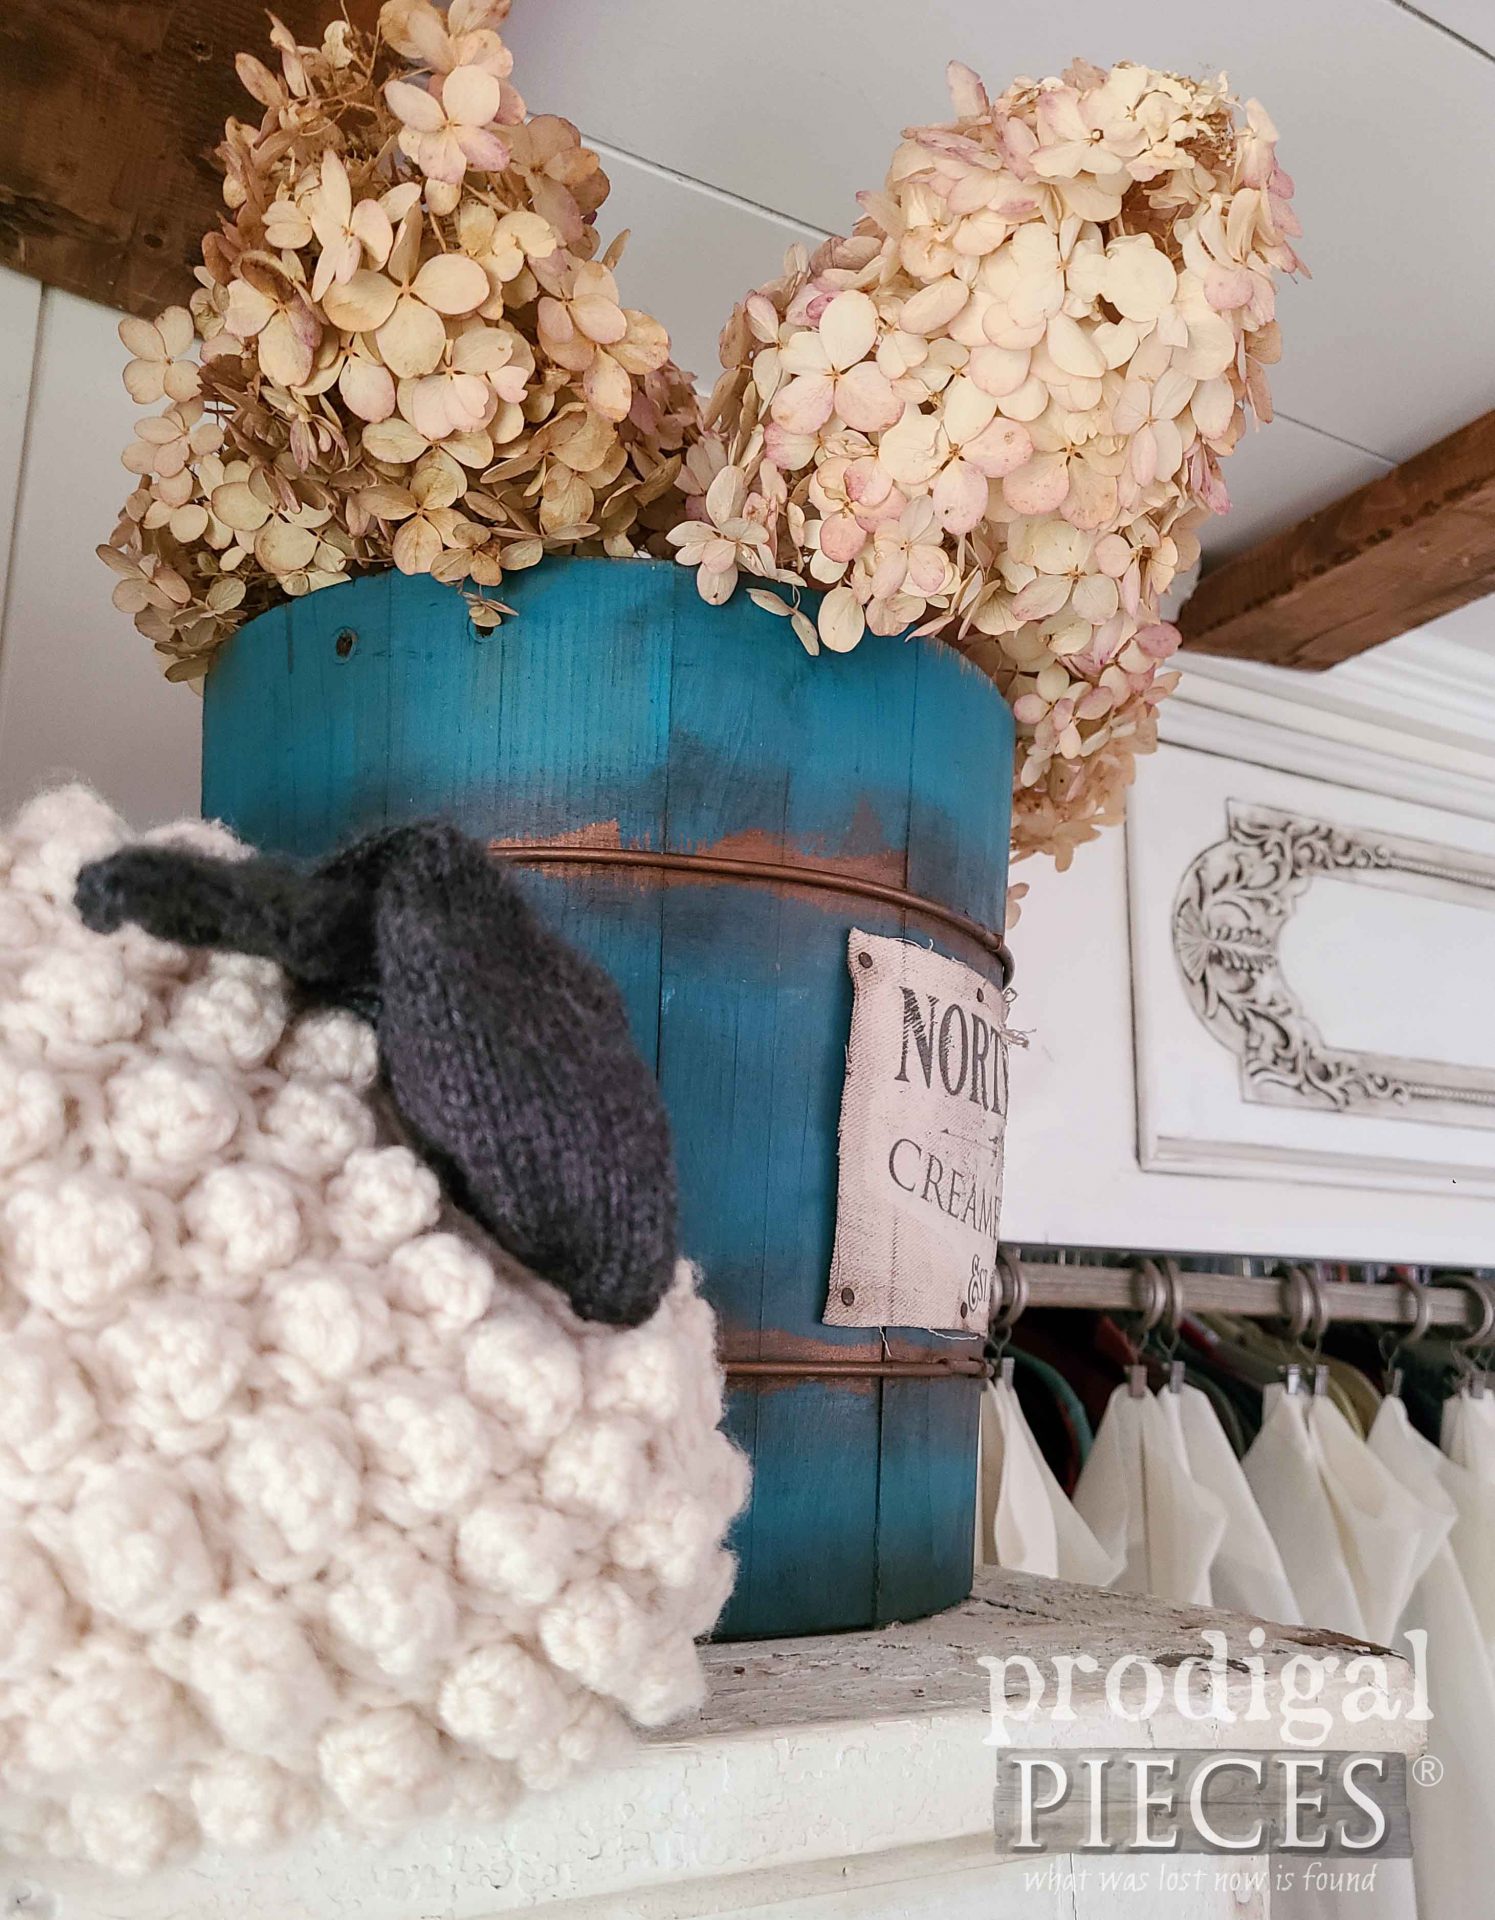 Farmhouse Sheep with Vintage Ice Cream Bucket by Larissa of Prodigal Pieces | prodigalpieces.com #prodigalpieces #farmhouse